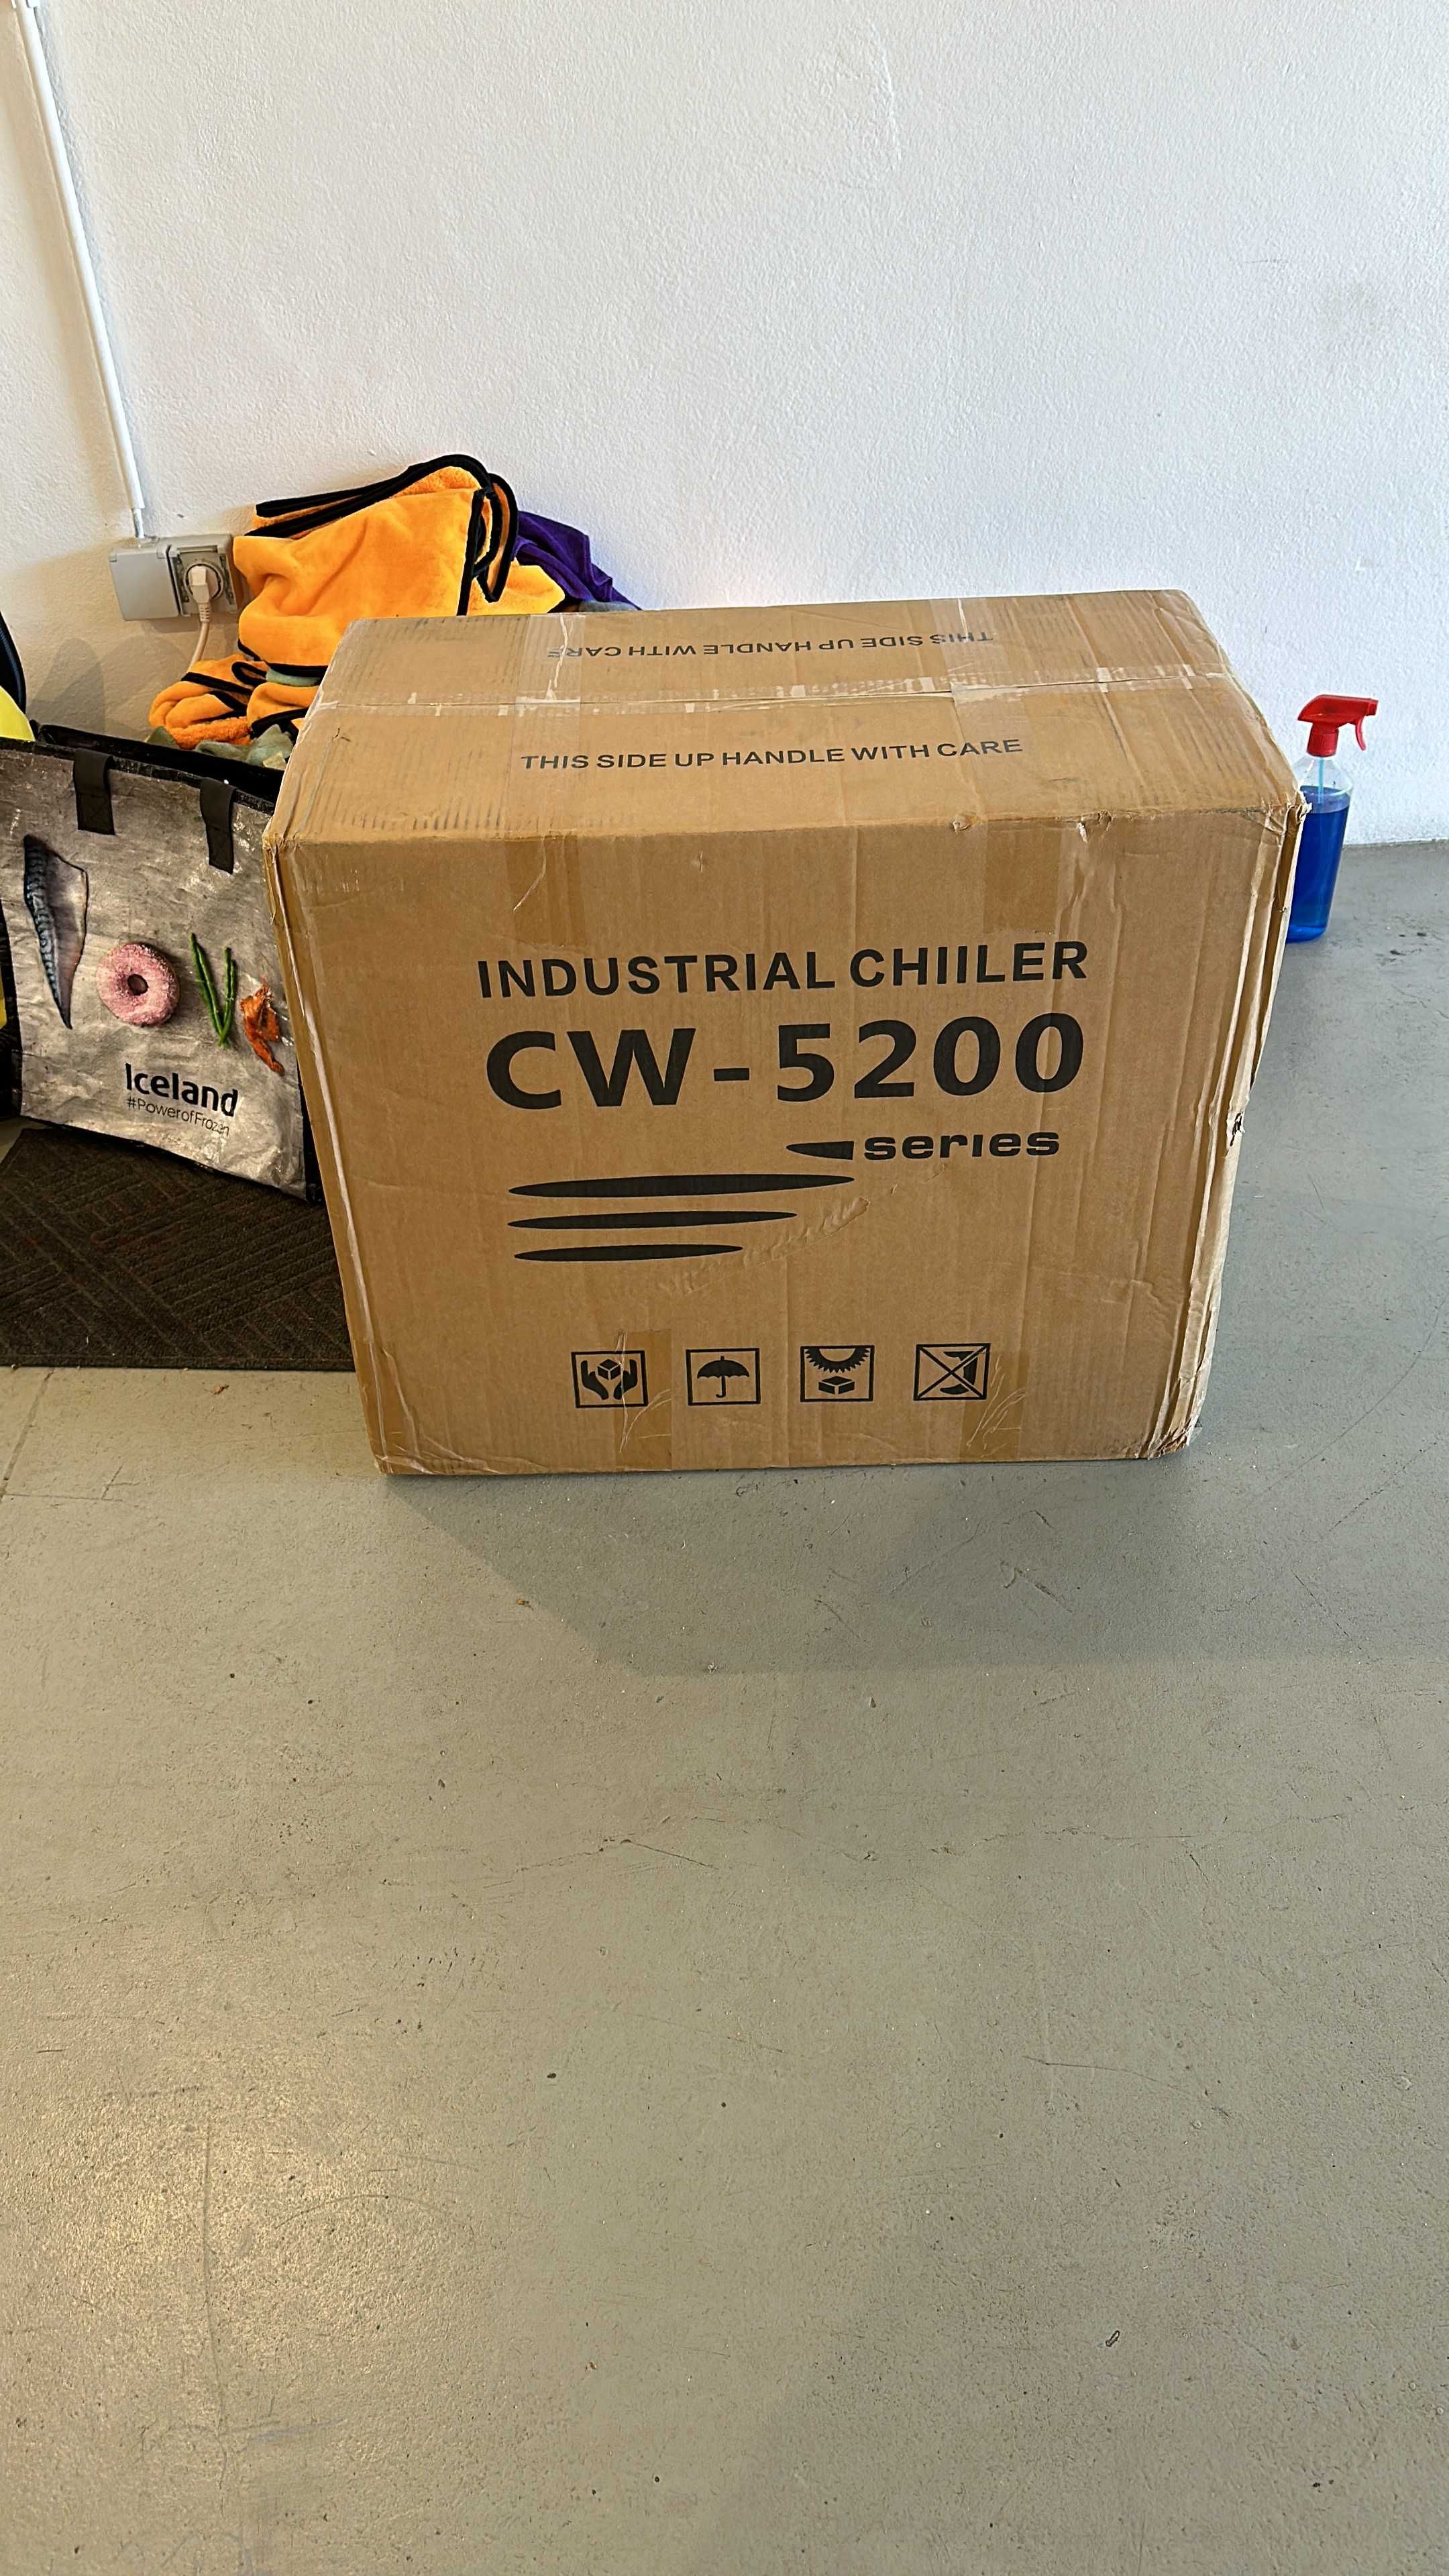 Chiller CW-5200 Industrial